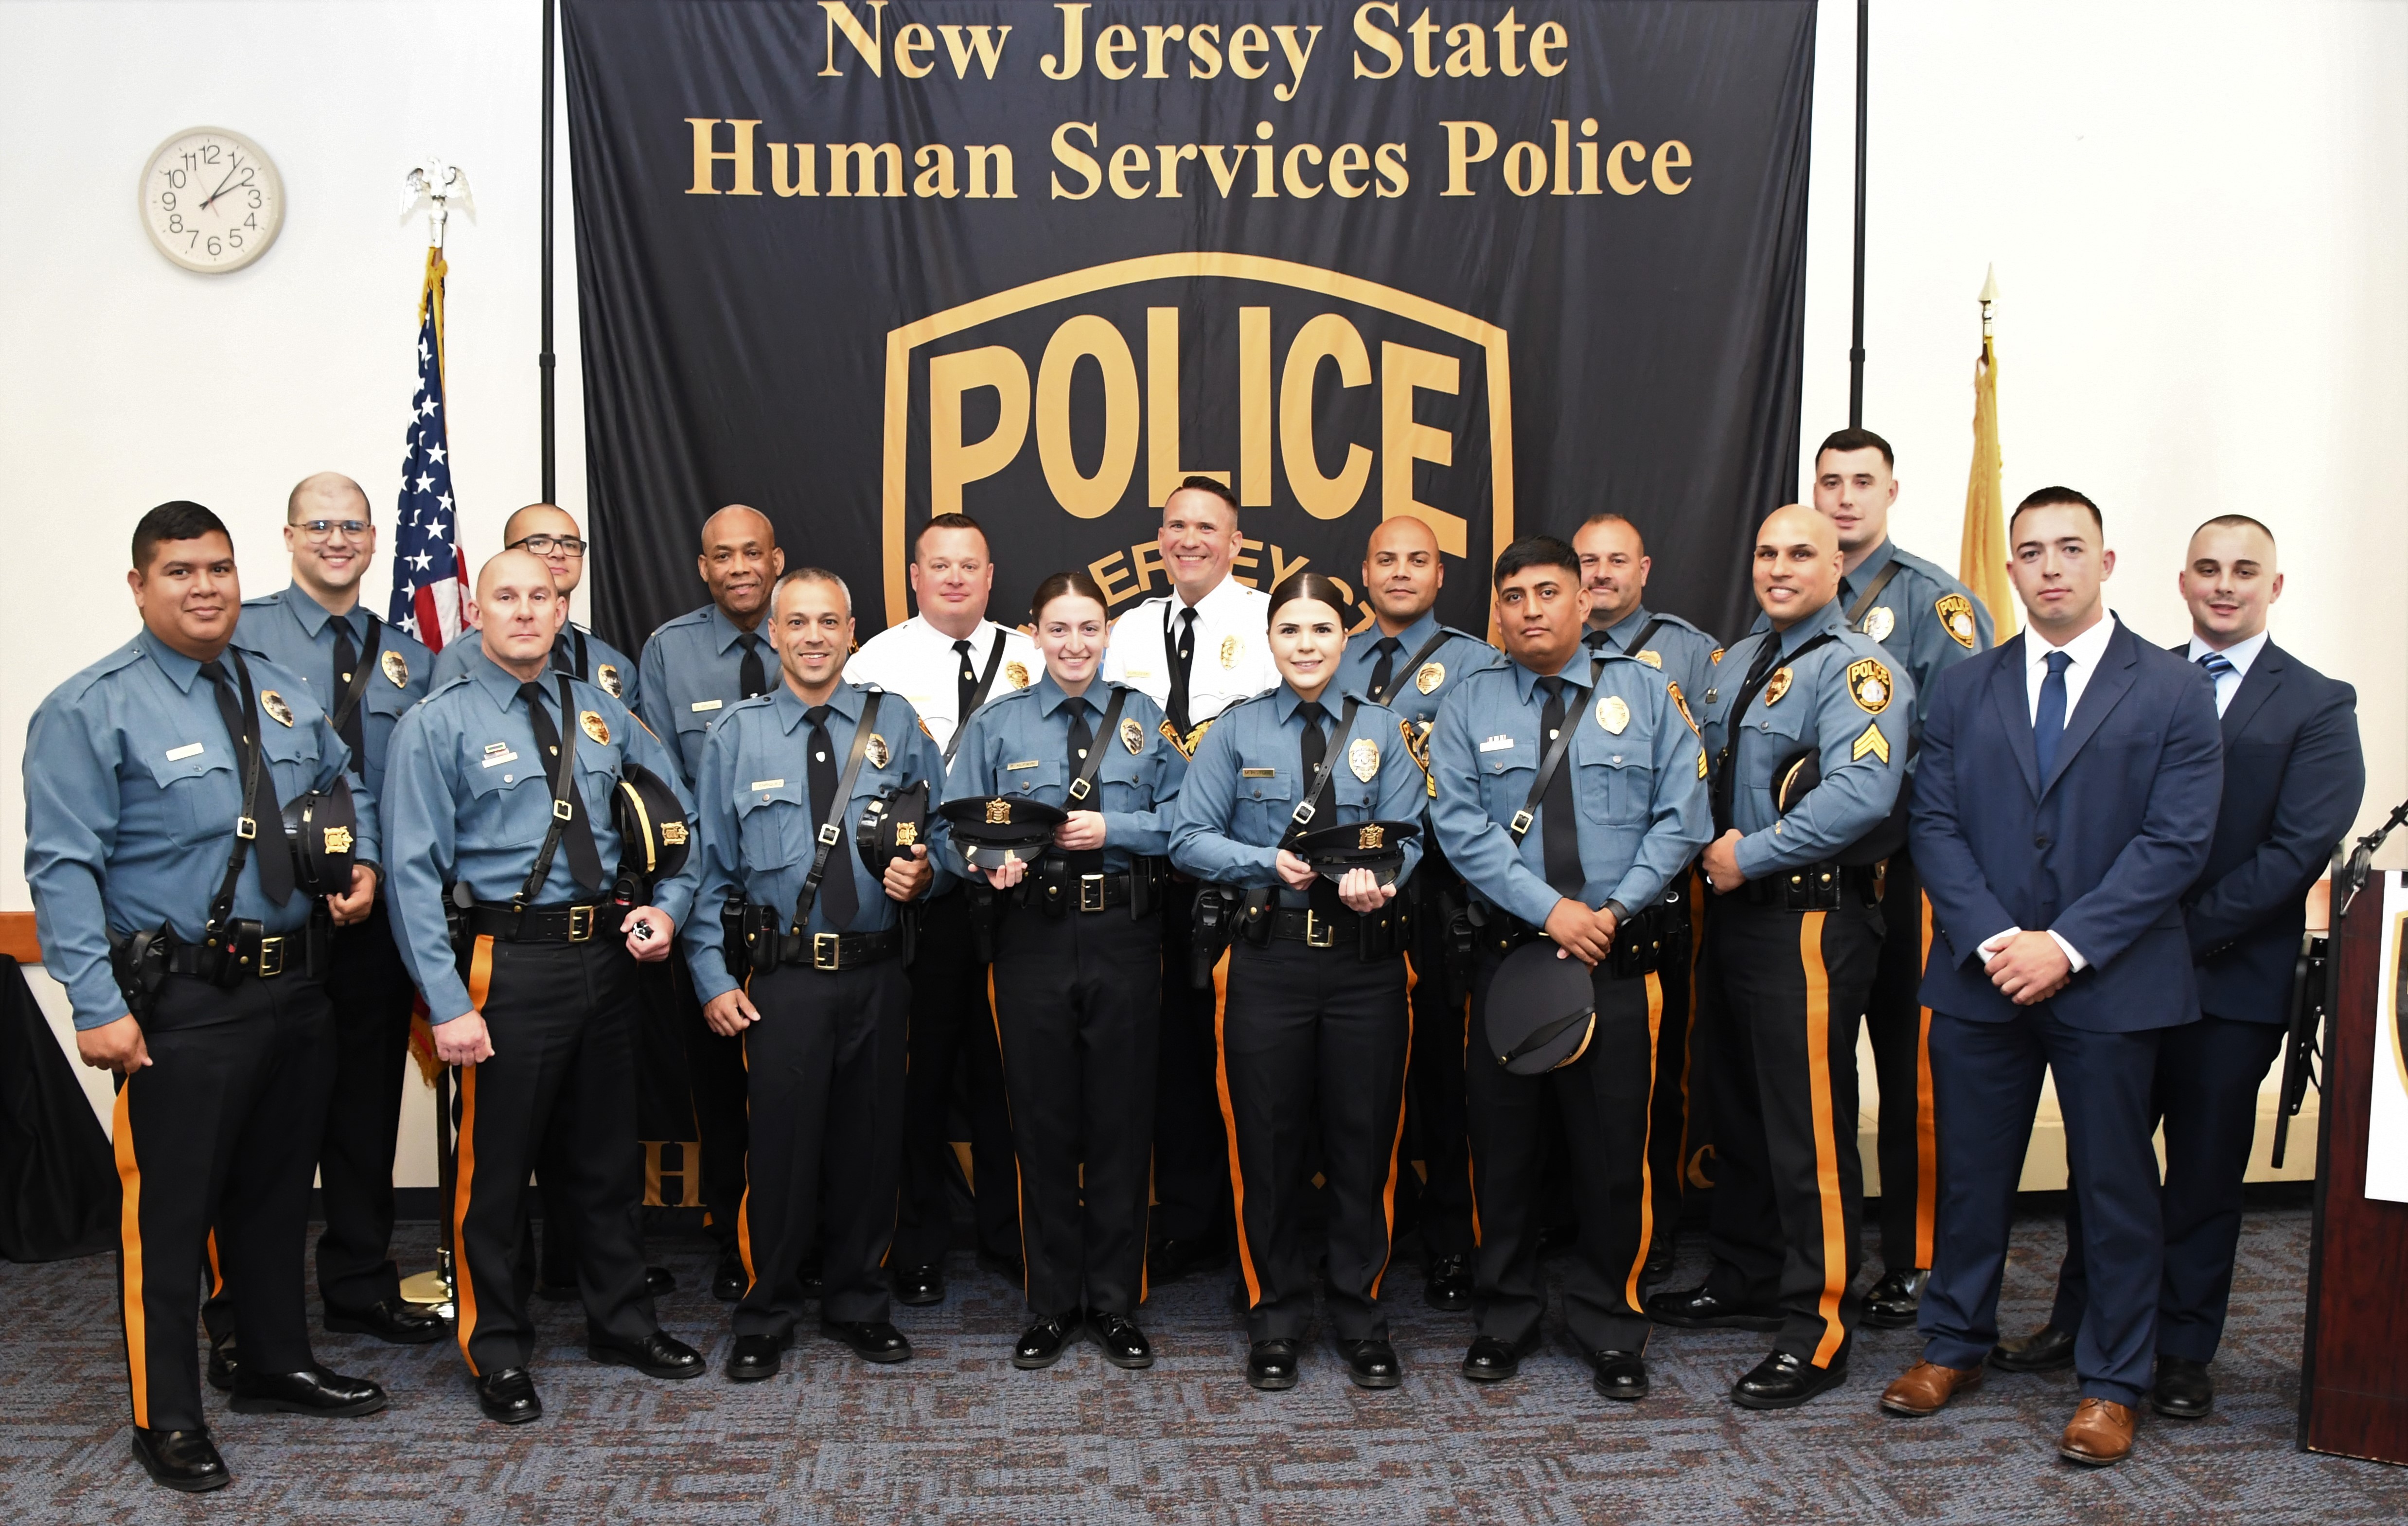 New Jersey State Human Services Police, NJ Police Jobs